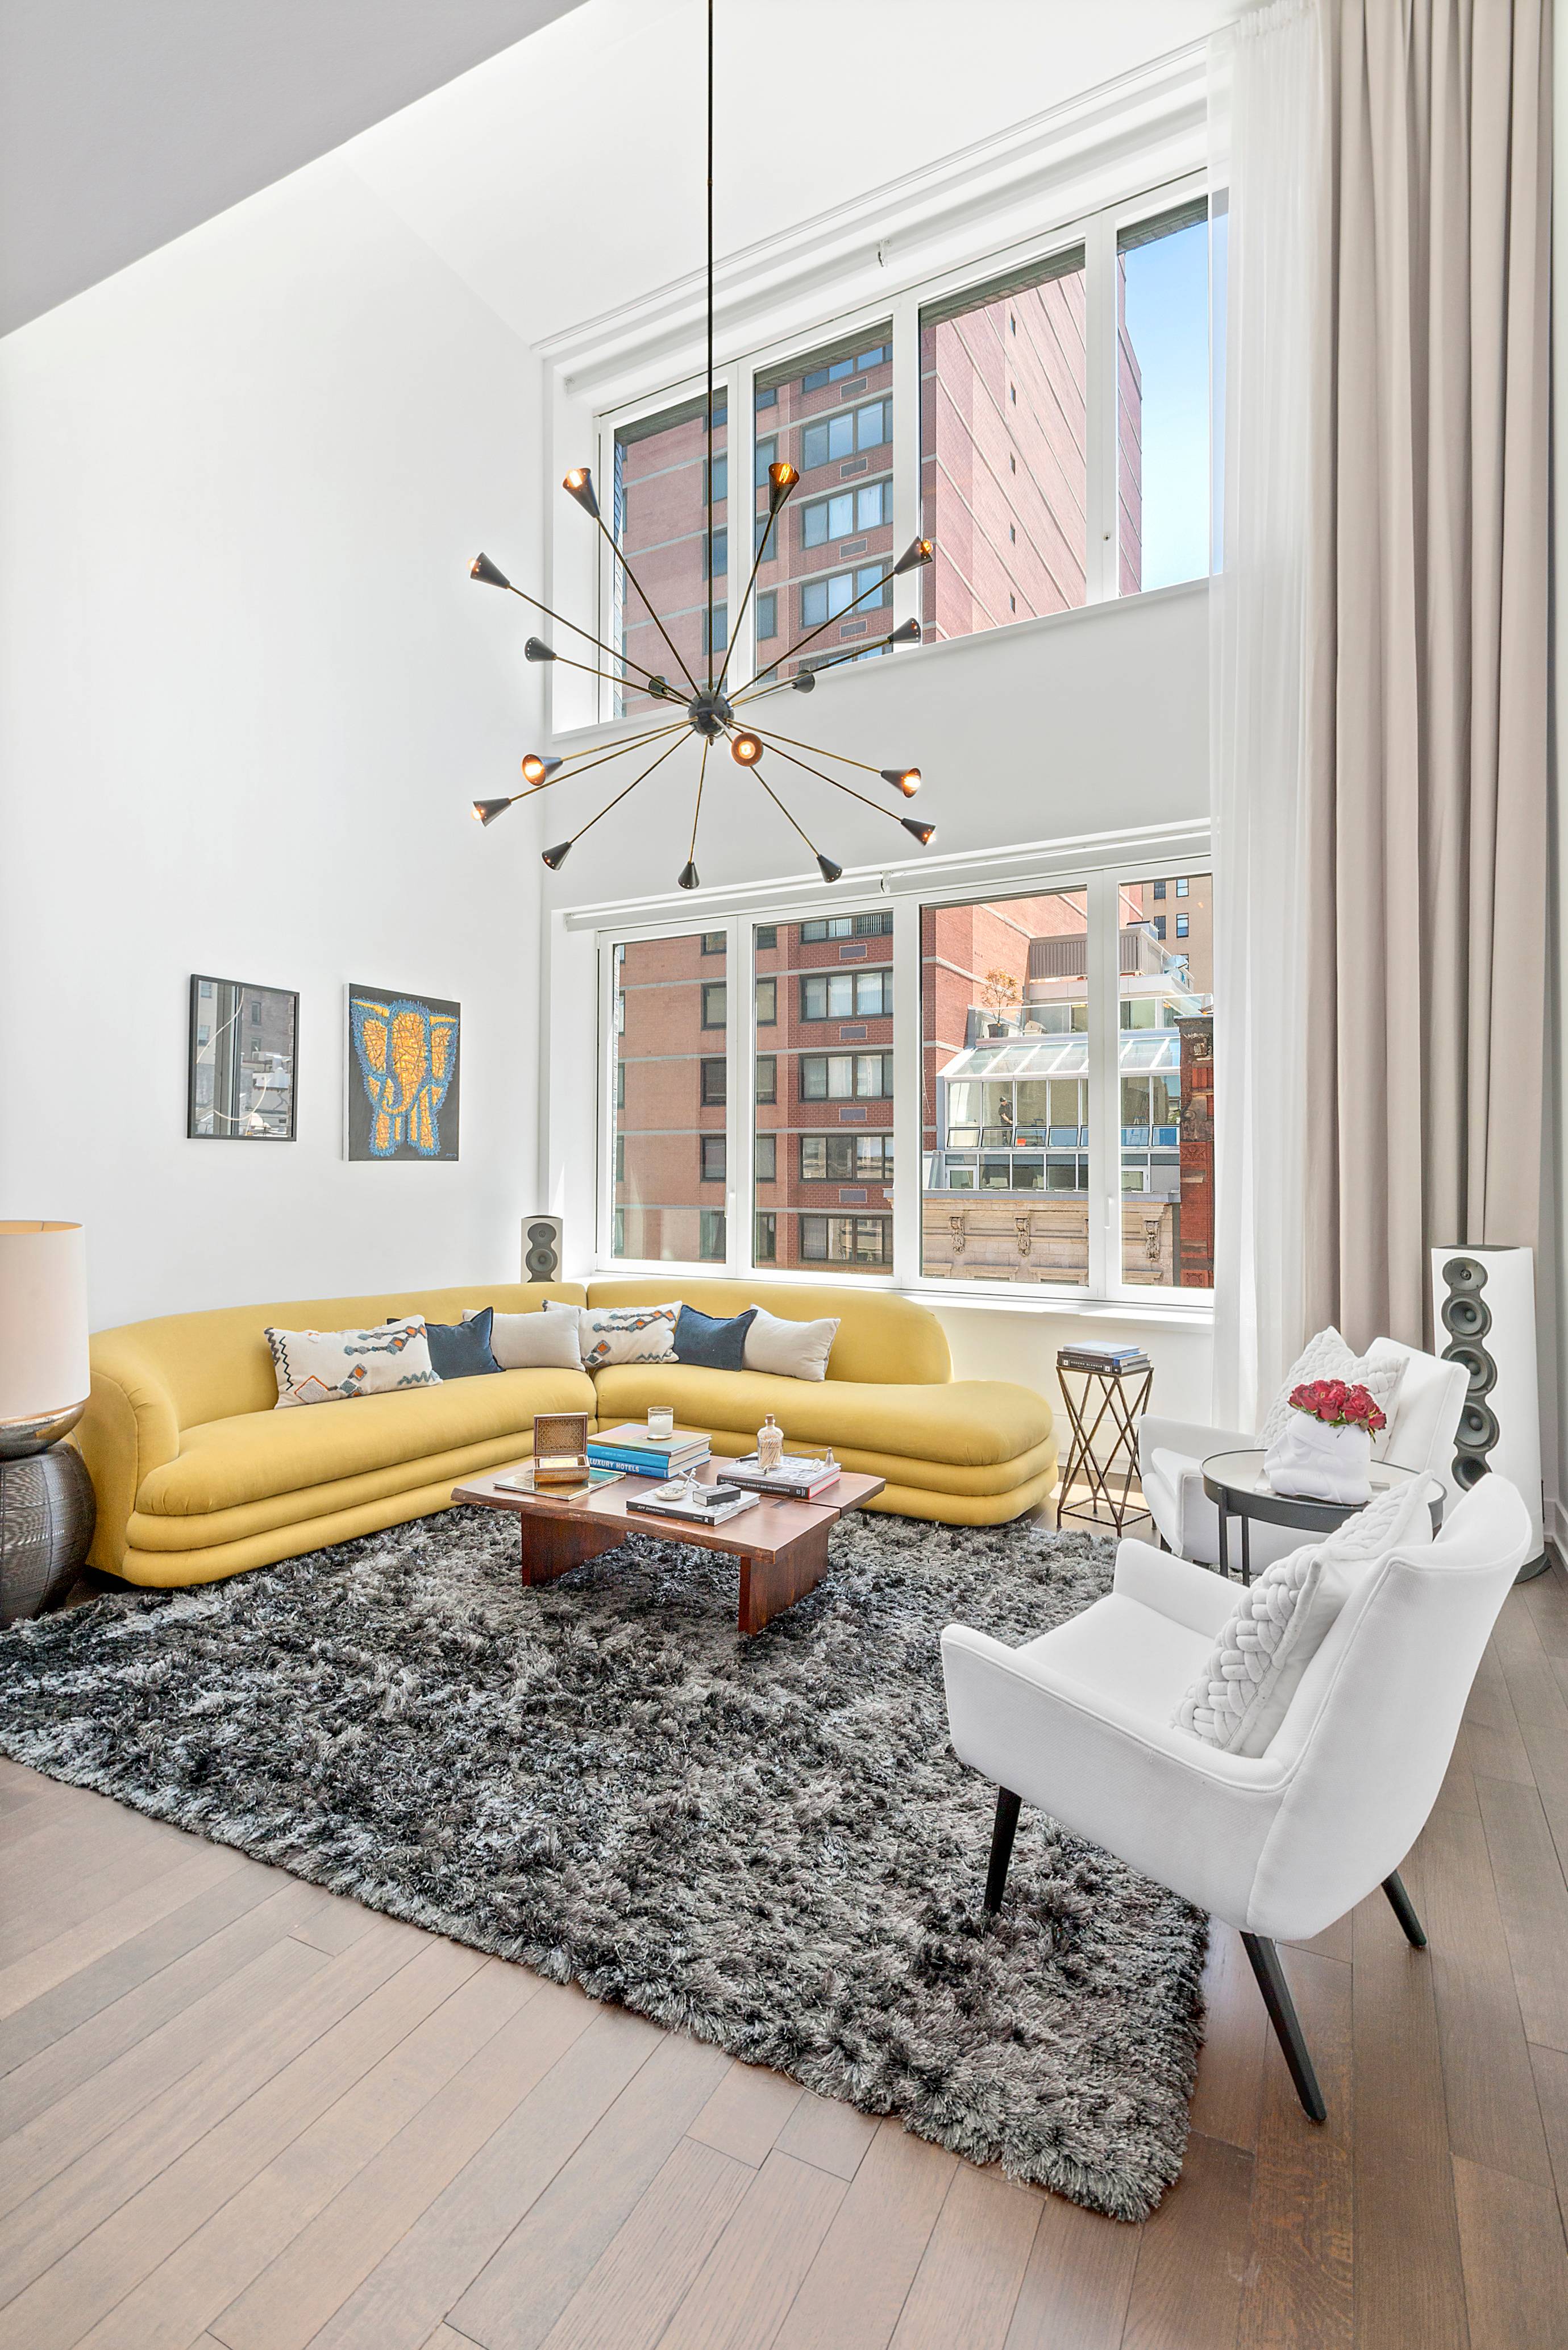 Welcome to residence 7B an exceptional and one of a kind 1, 830 square feet duplex loft, located at 5 Franklin Place one of TriBeCas newest development.